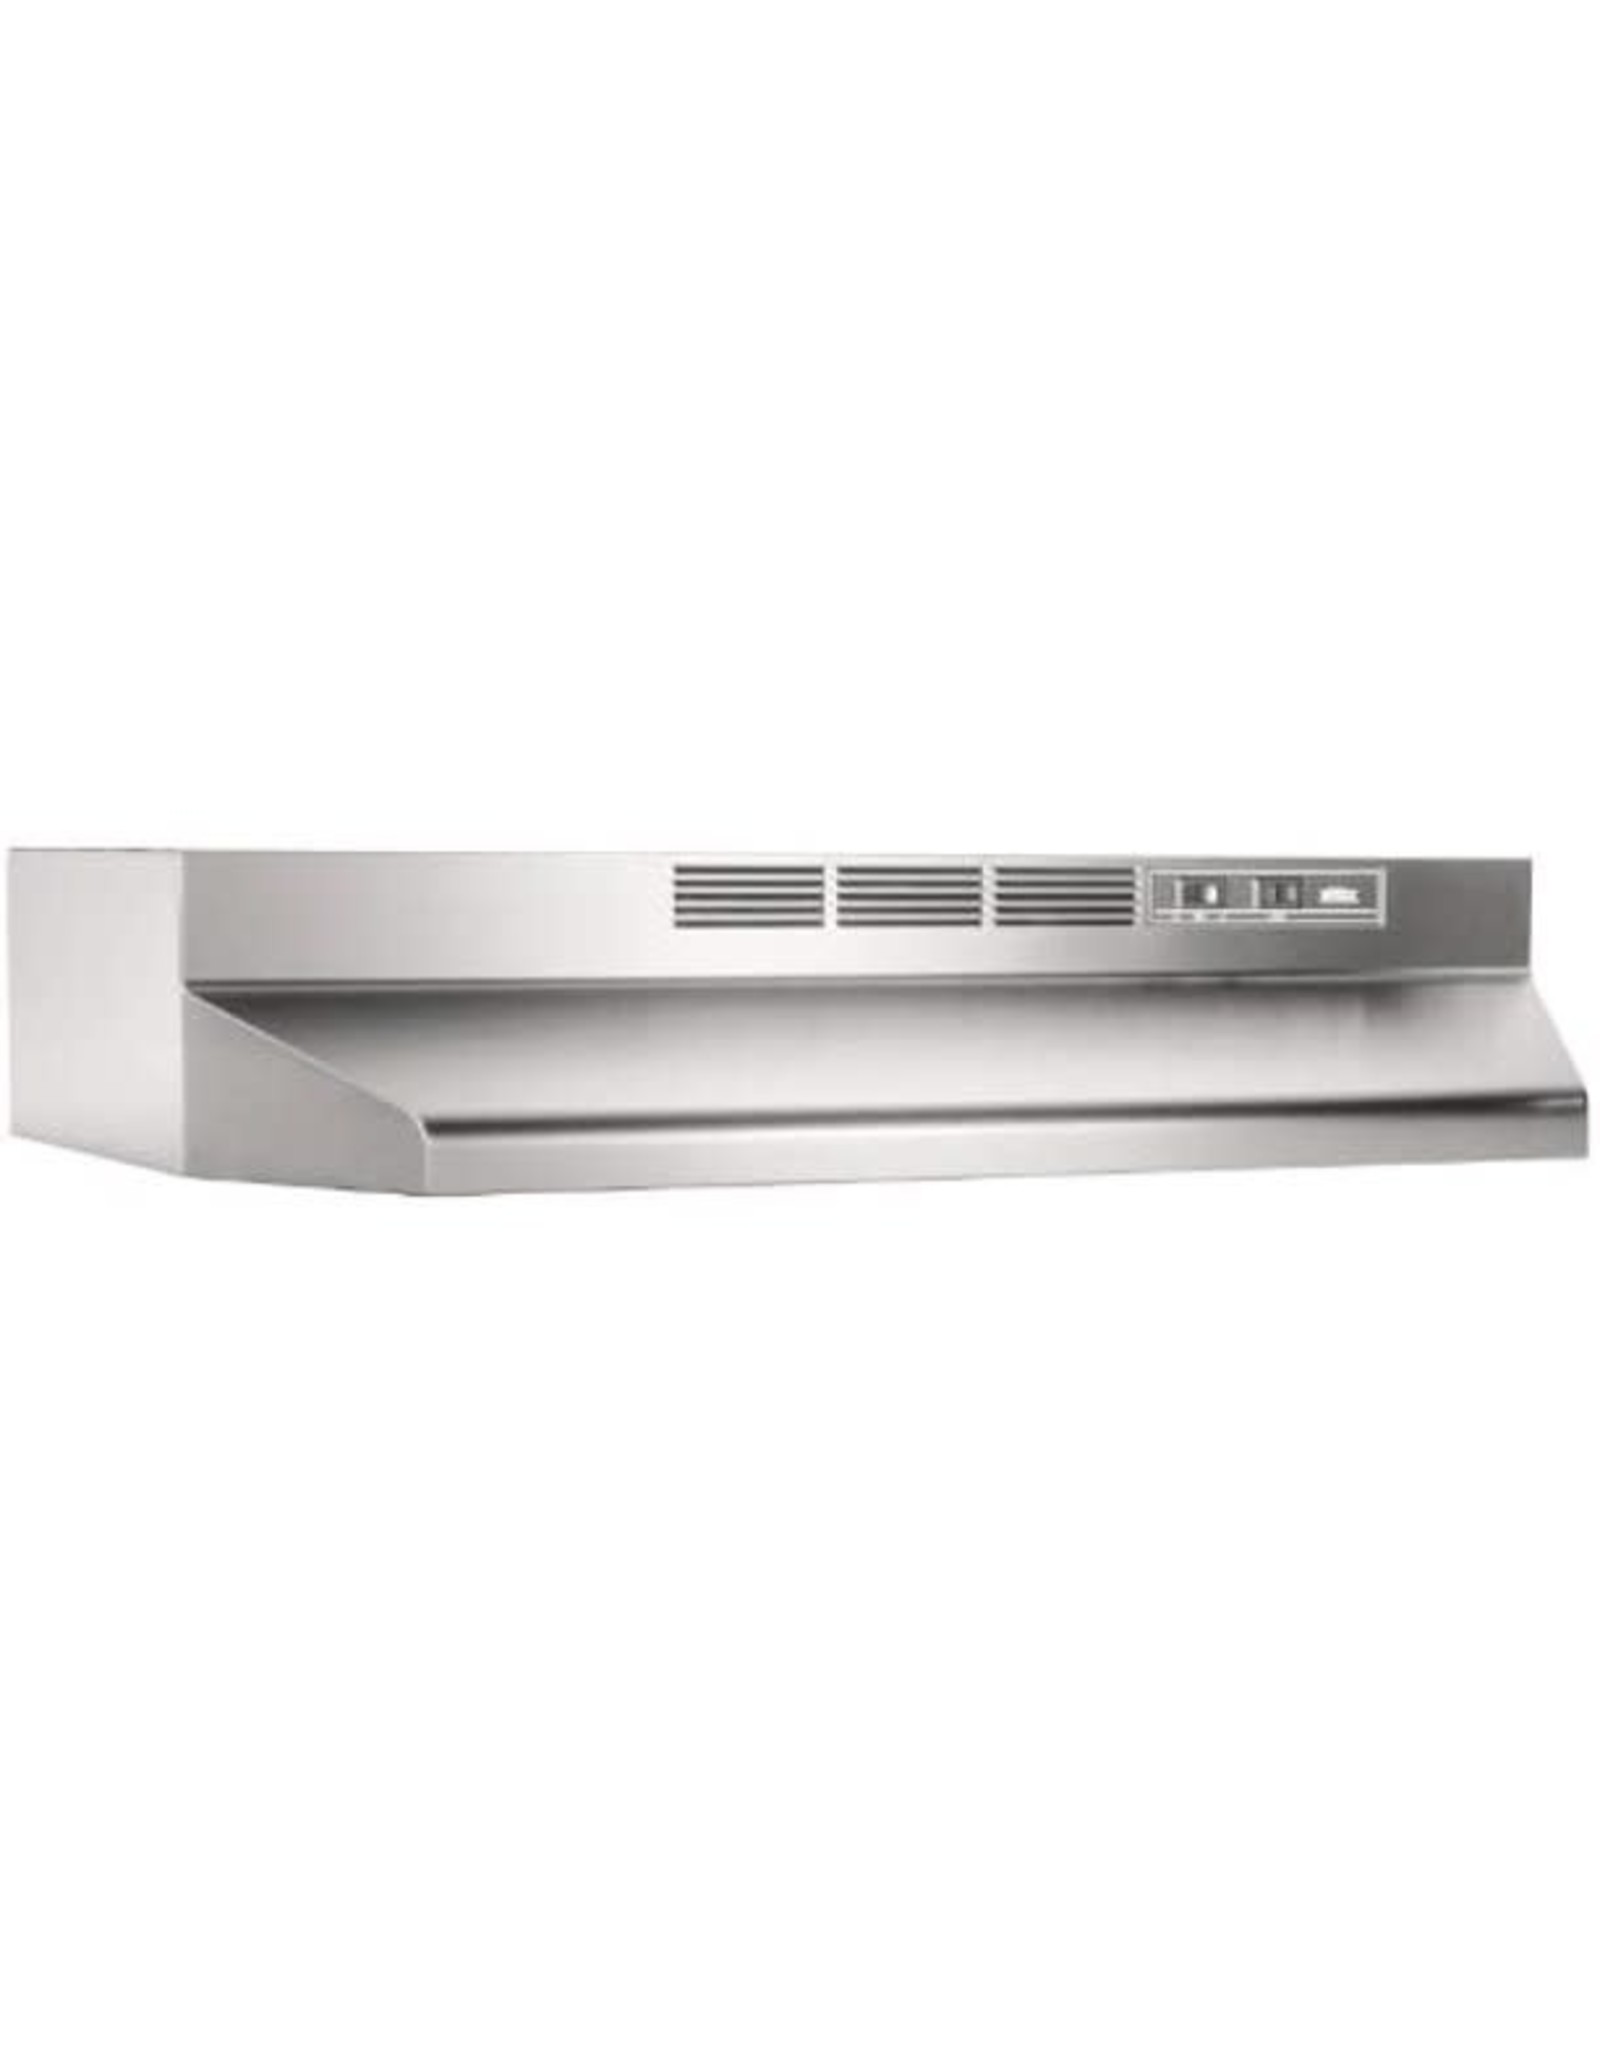 412404  41000 Series 24 in. Ductless Under Cabinet Range Hood with Light in Stainless Steel